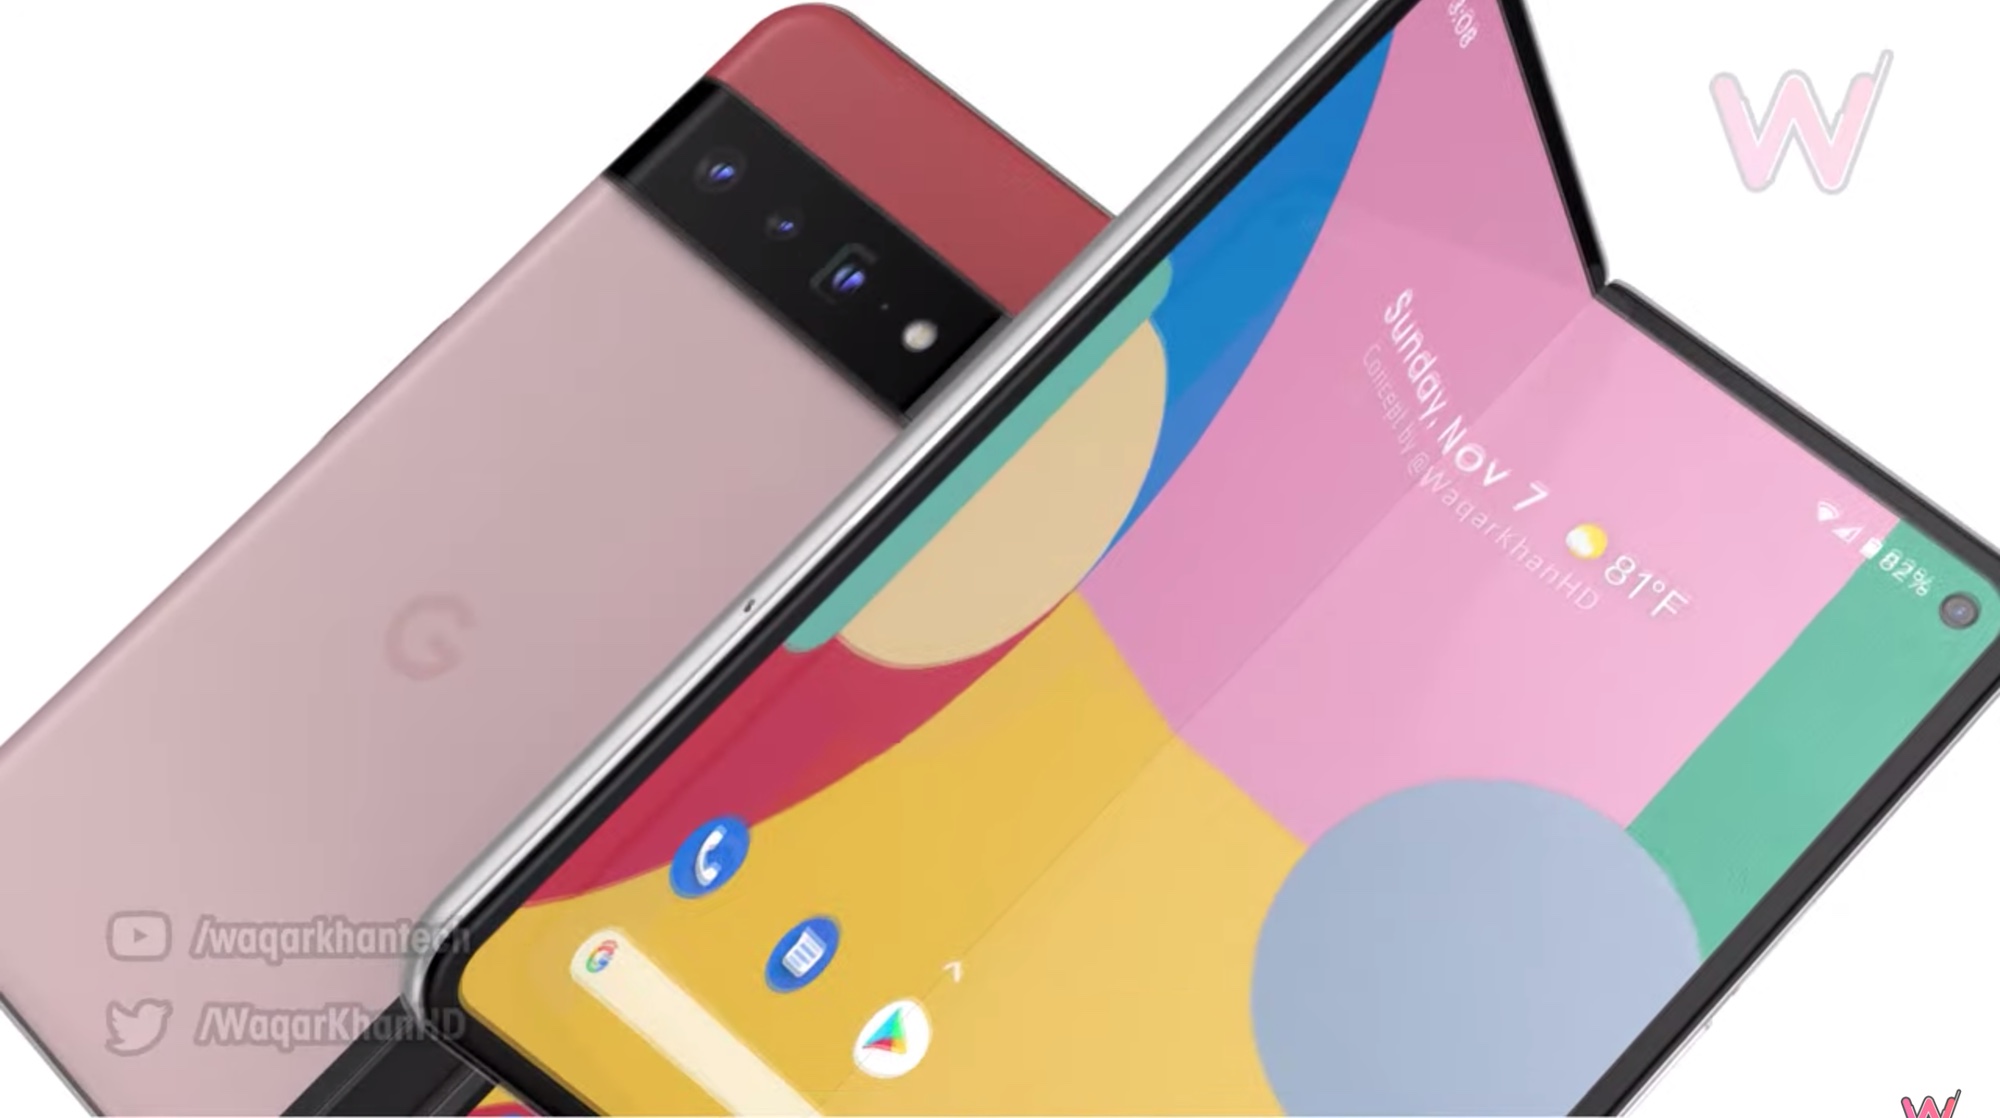 Pixel Fold concept design shows similar appearance to Pixel 6